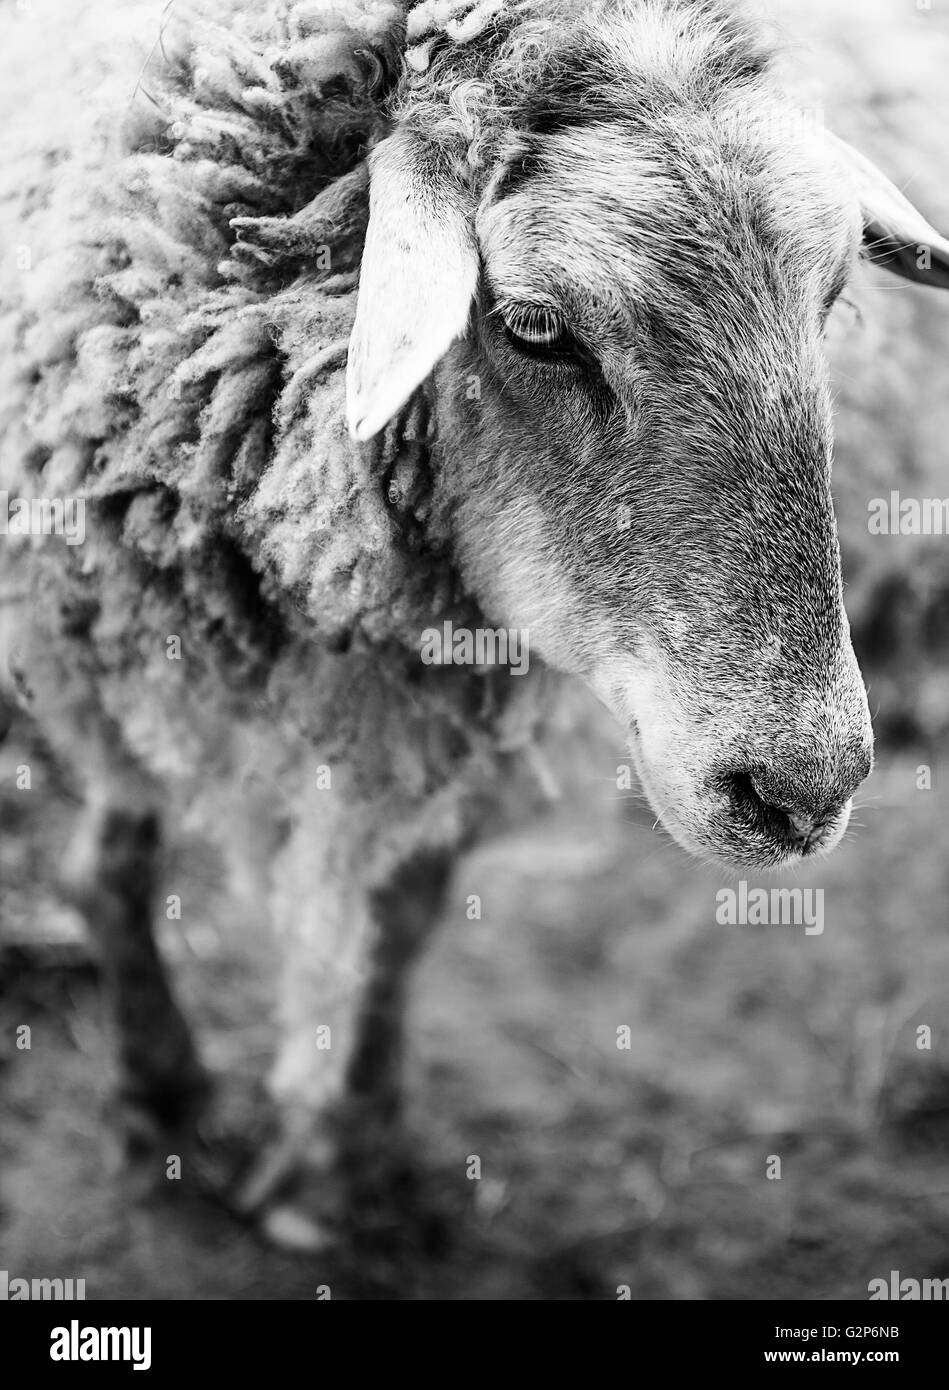 Portrait of a Sheep grazing on the meadow Stock Photo